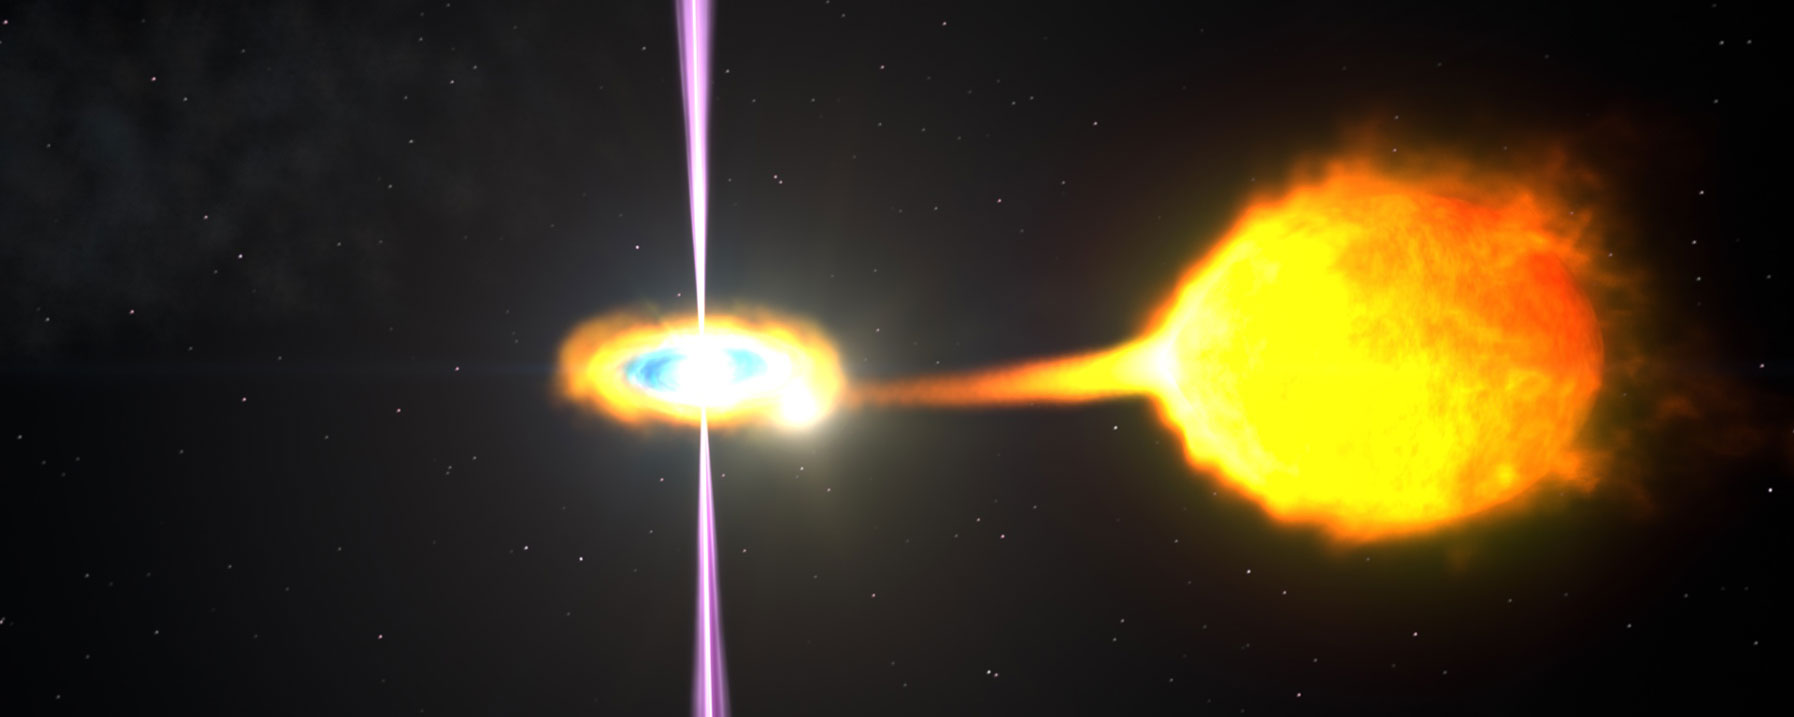 An illustration of an accreting pulsar, or a type of powerful, rotating neutron star actively feeding off a companion star.